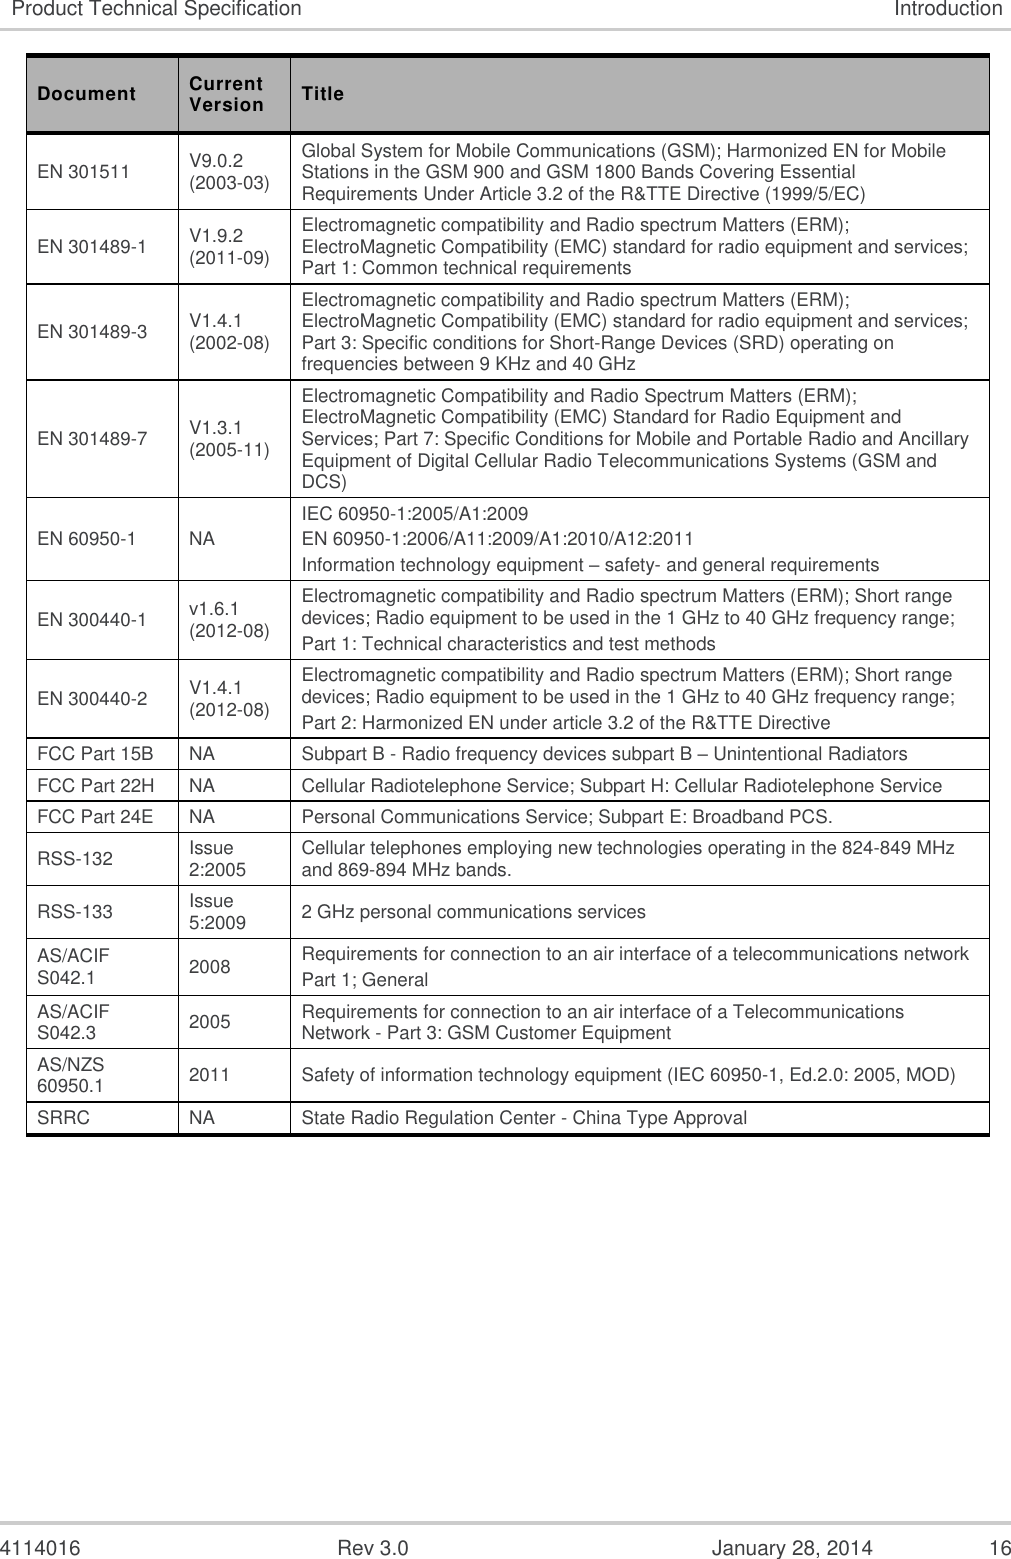  4114016  Rev 3.0  January 28, 2014  16 Product Technical Specification Introduction Document Current Version Title EN 301511 V9.0.2 (2003-03) Global System for Mobile Communications (GSM); Harmonized EN for Mobile Stations in the GSM 900 and GSM 1800 Bands Covering Essential Requirements Under Article 3.2 of the R&amp;TTE Directive (1999/5/EC) EN 301489-1 V1.9.2 (2011-09) Electromagnetic compatibility and Radio spectrum Matters (ERM); ElectroMagnetic Compatibility (EMC) standard for radio equipment and services; Part 1: Common technical requirements EN 301489-3 V1.4.1 (2002-08) Electromagnetic compatibility and Radio spectrum Matters (ERM); ElectroMagnetic Compatibility (EMC) standard for radio equipment and services; Part 3: Specific conditions for Short-Range Devices (SRD) operating on frequencies between 9 KHz and 40 GHz EN 301489-7 V1.3.1 (2005-11) Electromagnetic Compatibility and Radio Spectrum Matters (ERM); ElectroMagnetic Compatibility (EMC) Standard for Radio Equipment and Services; Part 7: Specific Conditions for Mobile and Portable Radio and Ancillary Equipment of Digital Cellular Radio Telecommunications Systems (GSM and DCS) EN 60950-1 NA IEC 60950-1:2005/A1:2009 EN 60950-1:2006/A11:2009/A1:2010/A12:2011 Information technology equipment – safety- and general requirements EN 300440-1 v1.6.1 (2012-08) Electromagnetic compatibility and Radio spectrum Matters (ERM); Short range devices; Radio equipment to be used in the 1 GHz to 40 GHz frequency range; Part 1: Technical characteristics and test methods EN 300440-2 V1.4.1 (2012-08) Electromagnetic compatibility and Radio spectrum Matters (ERM); Short range devices; Radio equipment to be used in the 1 GHz to 40 GHz frequency range; Part 2: Harmonized EN under article 3.2 of the R&amp;TTE Directive FCC Part 15B NA Subpart B - Radio frequency devices subpart B – Unintentional Radiators  FCC Part 22H NA Cellular Radiotelephone Service; Subpart H: Cellular Radiotelephone Service FCC Part 24E NA Personal Communications Service; Subpart E: Broadband PCS. RSS-132  Issue 2:2005 Cellular telephones employing new technologies operating in the 824-849 MHz and 869-894 MHz bands. RSS-133 Issue 5:2009 2 GHz personal communications services AS/ACIF S042.1 2008 Requirements for connection to an air interface of a telecommunications network Part 1; General AS/ACIF S042.3 2005 Requirements for connection to an air interface of a Telecommunications Network - Part 3: GSM Customer Equipment AS/NZS 60950.1 2011 Safety of information technology equipment (IEC 60950-1, Ed.2.0: 2005, MOD) SRRC NA State Radio Regulation Center - China Type Approval    